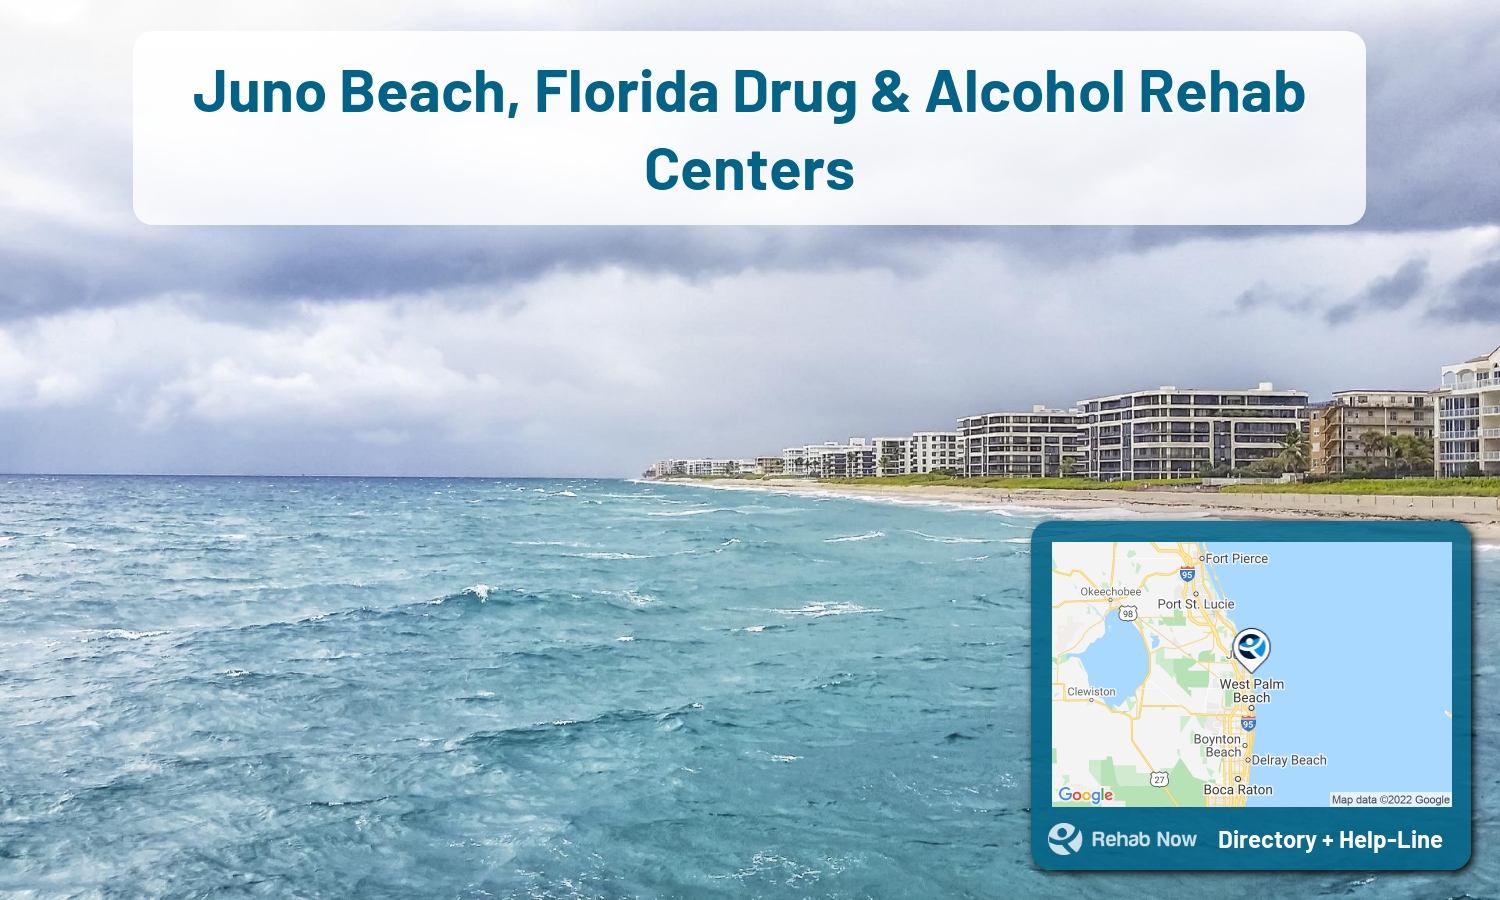 Juno Beach, FL Treatment Centers. Find drug rehab in Juno Beach, Florida, or detox and treatment programs. Get the right help now!